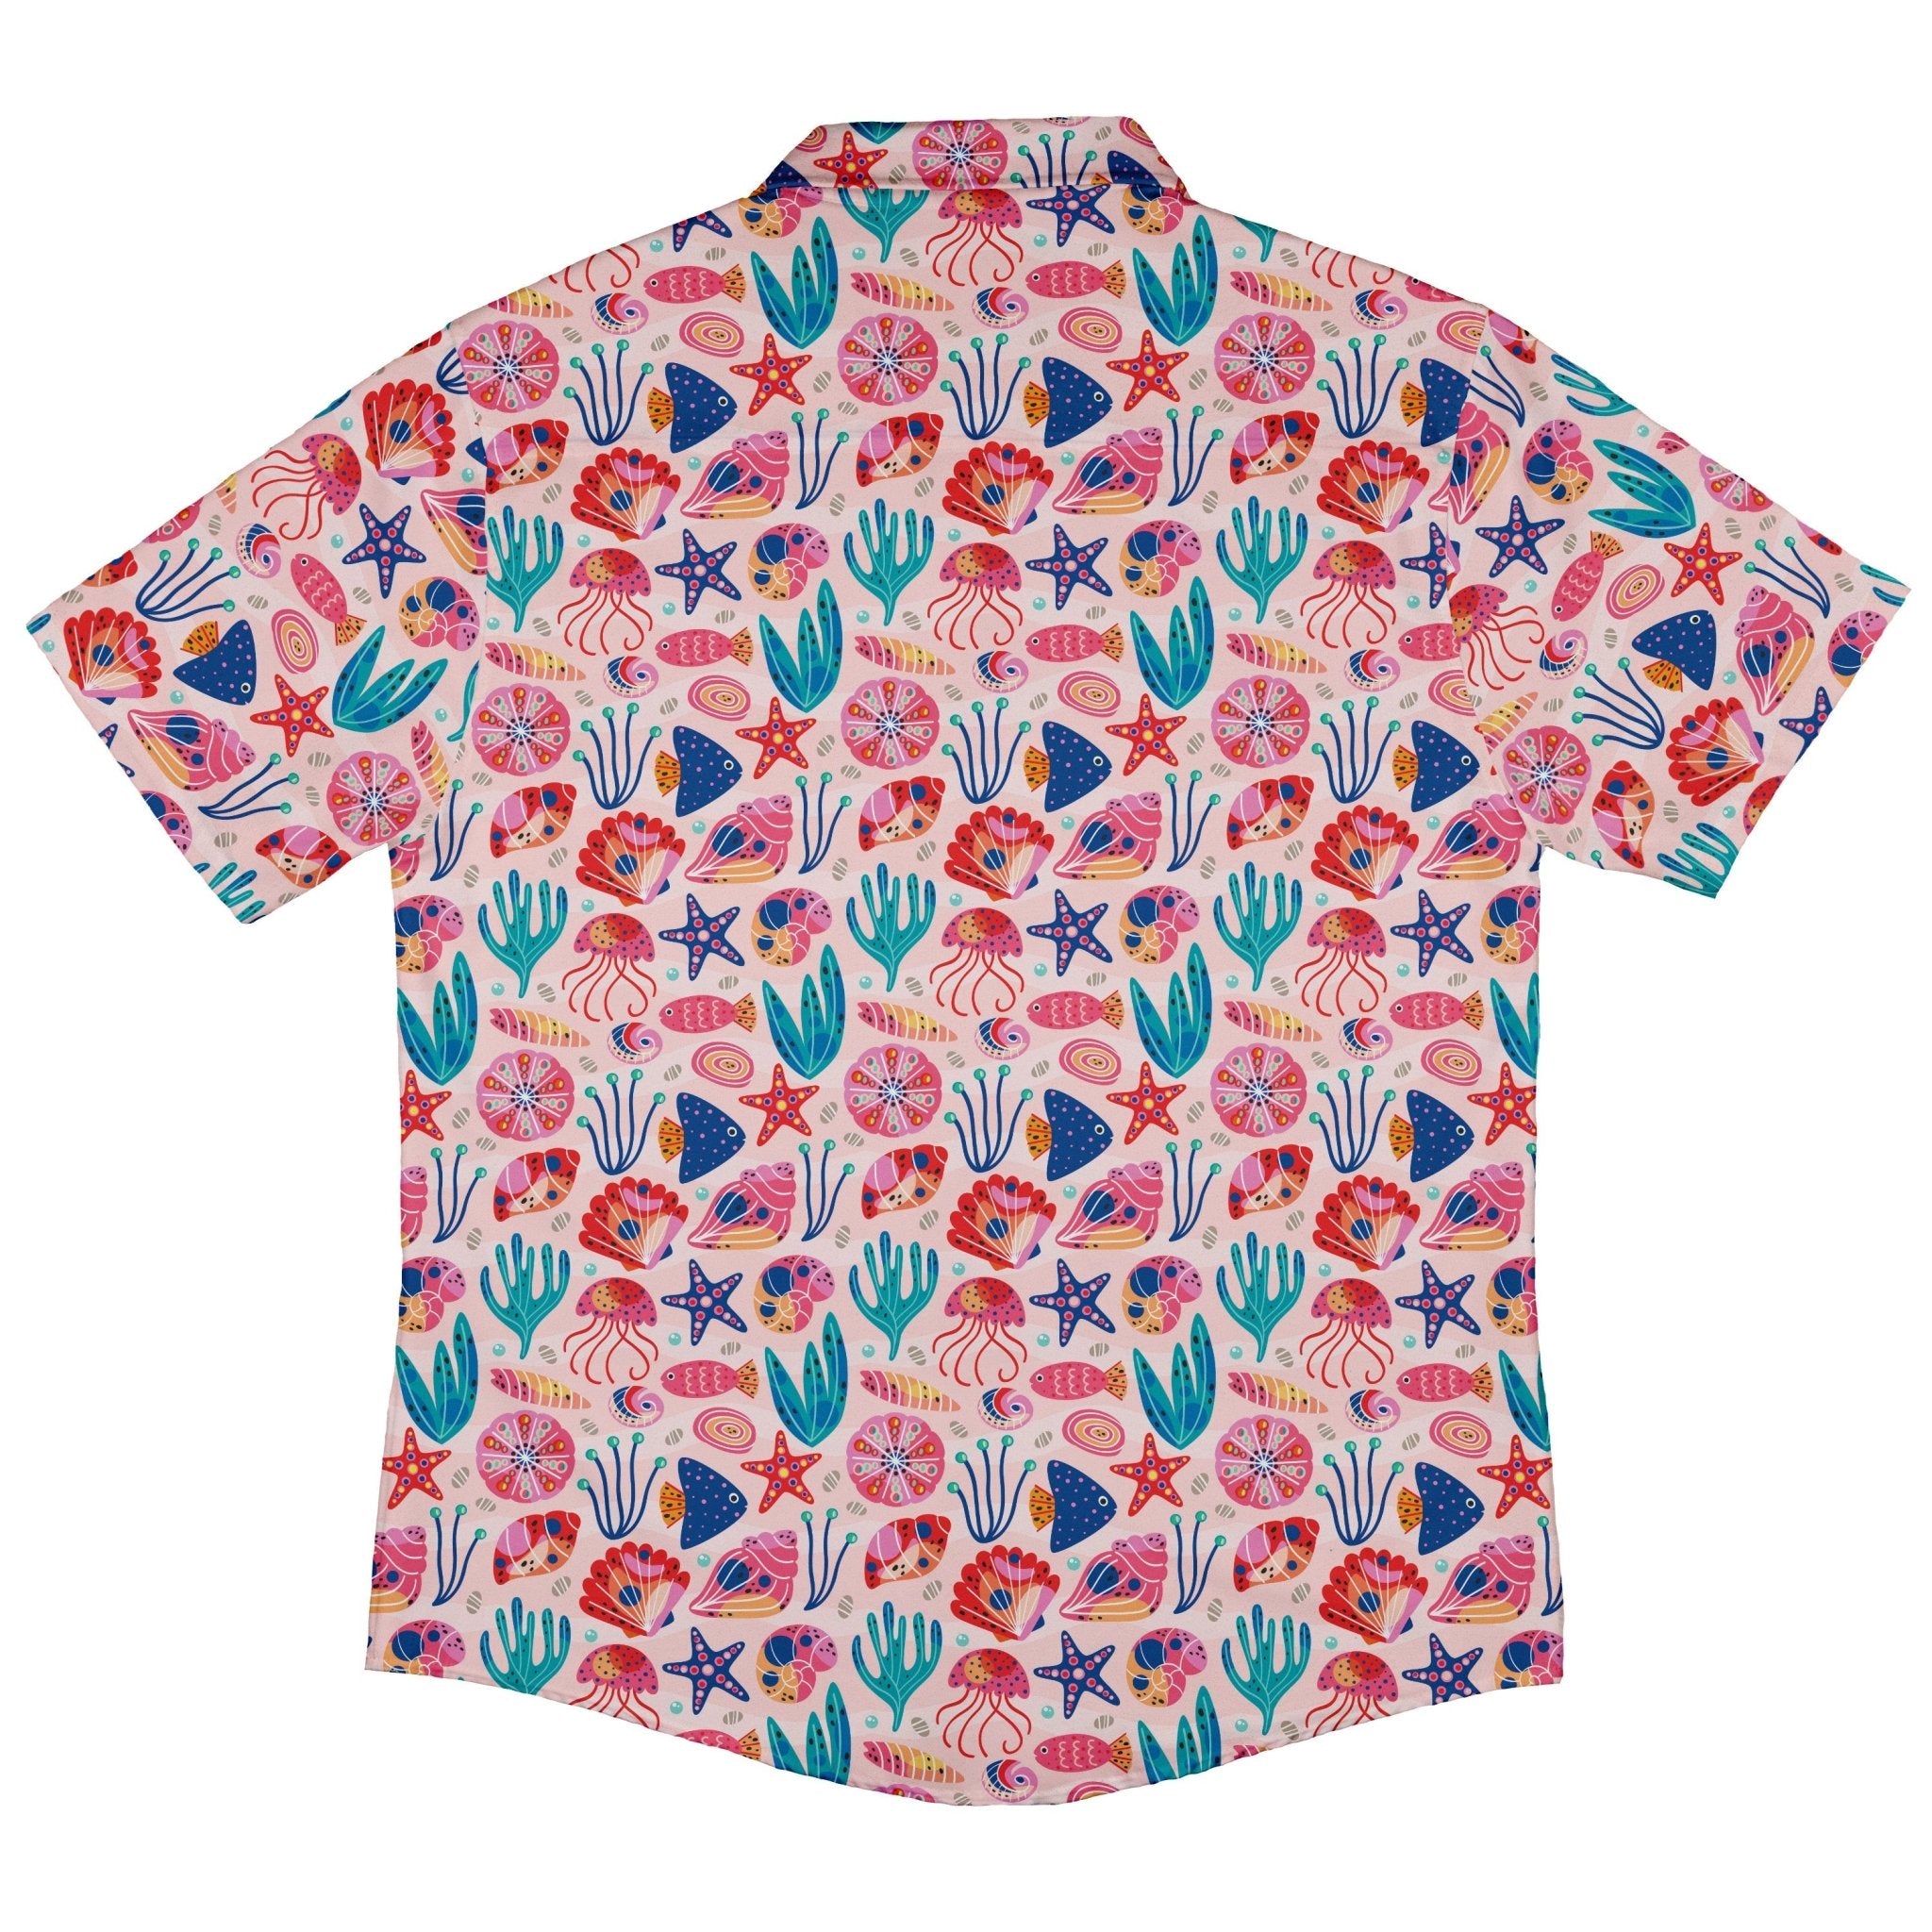 Science Cute Marine Biology Pink Button Up Shirt - adult sizing - Animal Patterns - science print